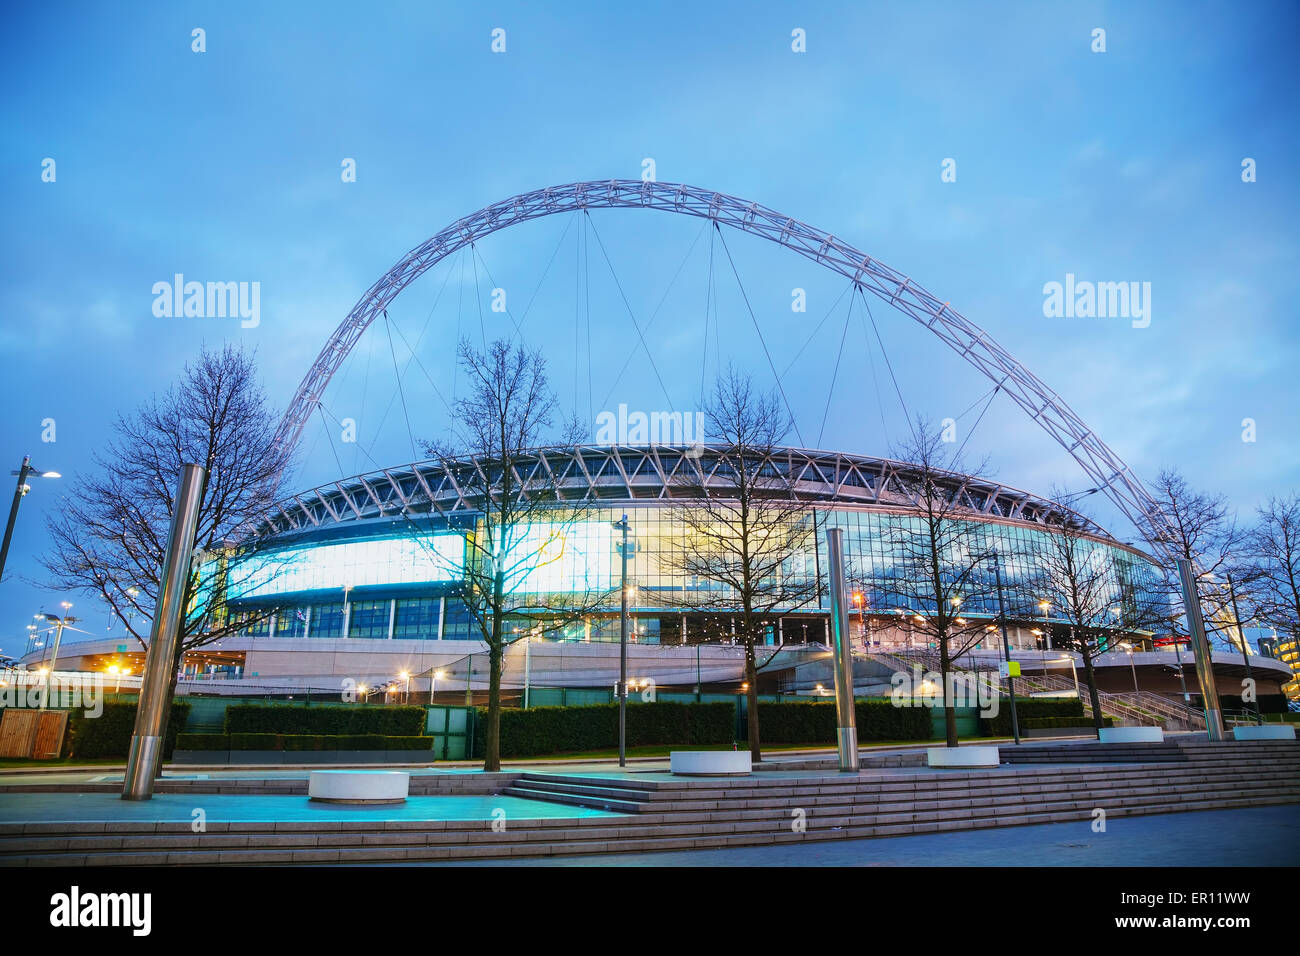 LONDON - APRIL 6: Wembley stadium on April 6, 2015 in London, UK. It's a football stadium in Wembley Park, which opened in 2007 Stock Photo